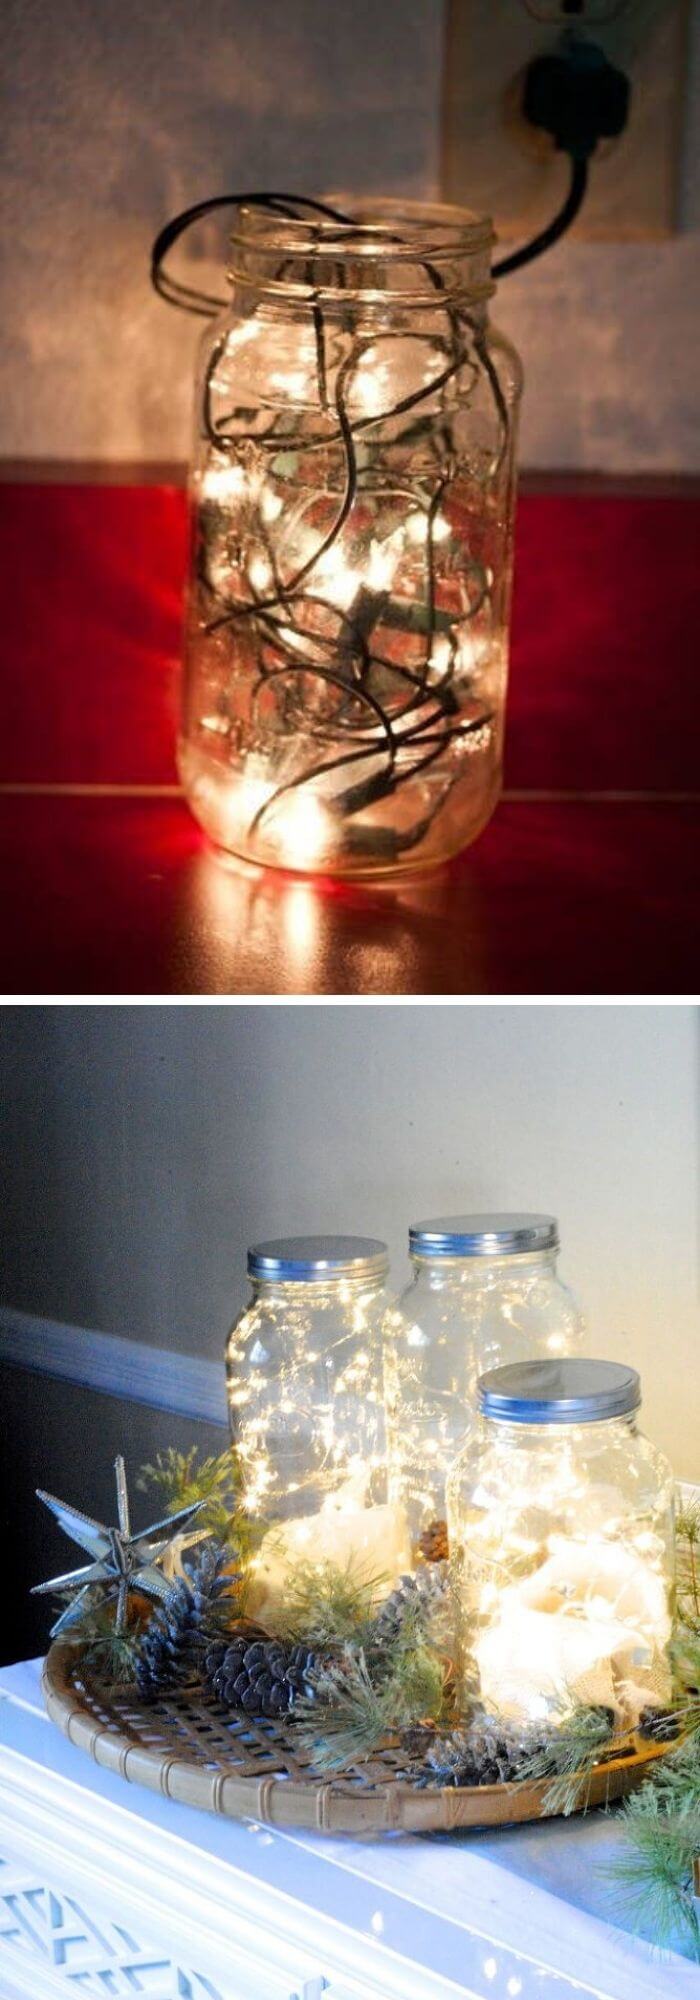 30 clever diy projects